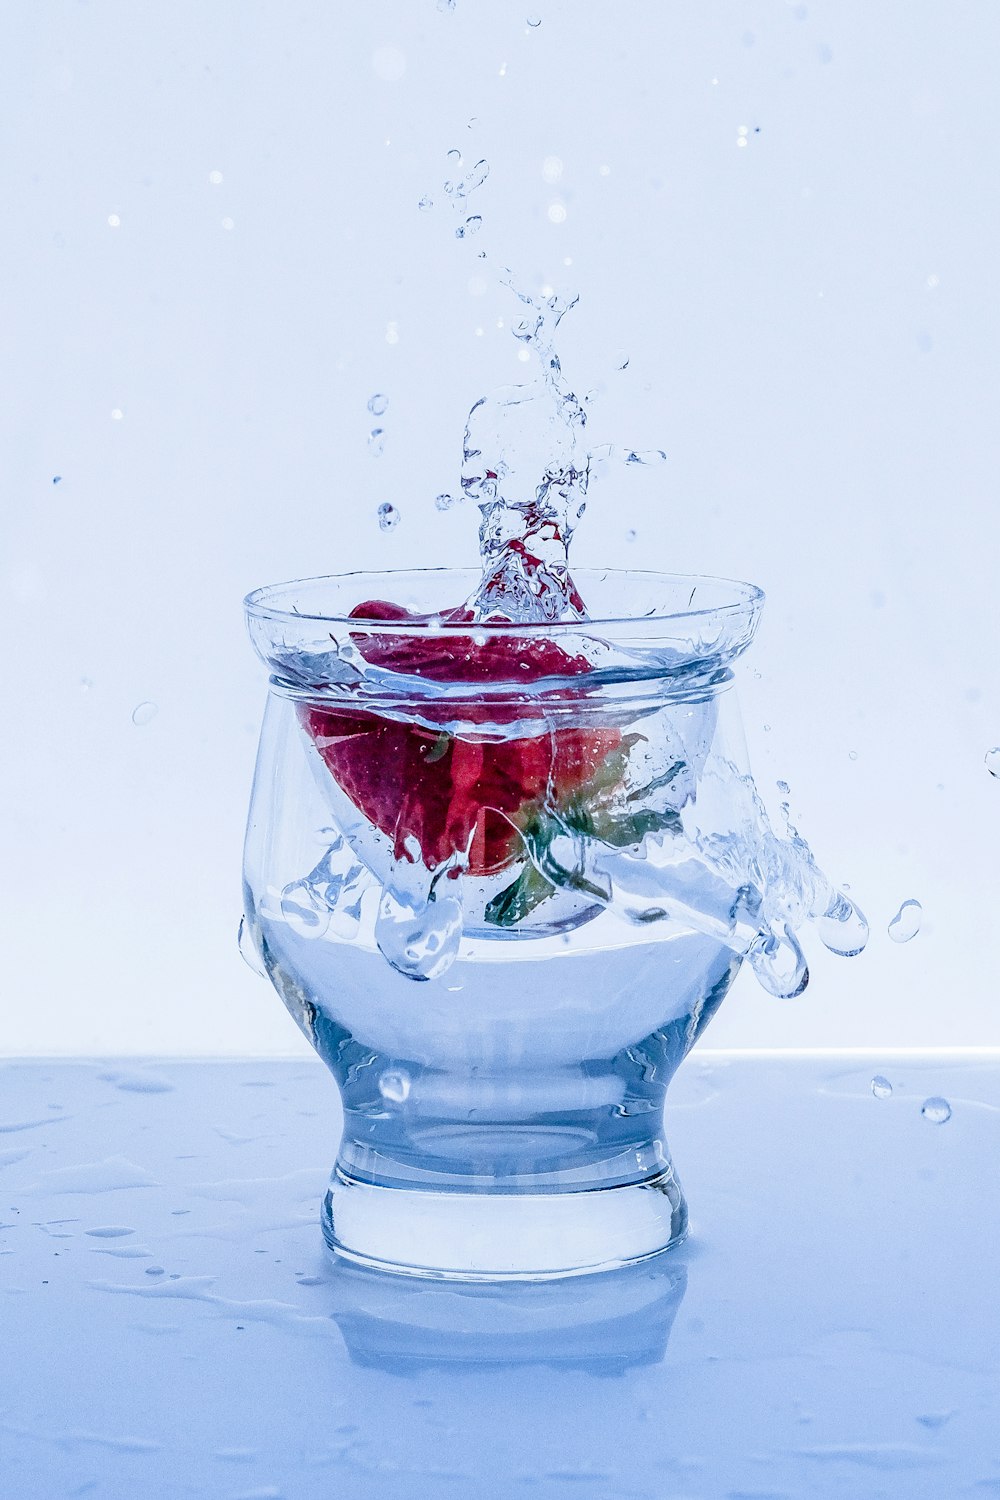 red rose in water with water